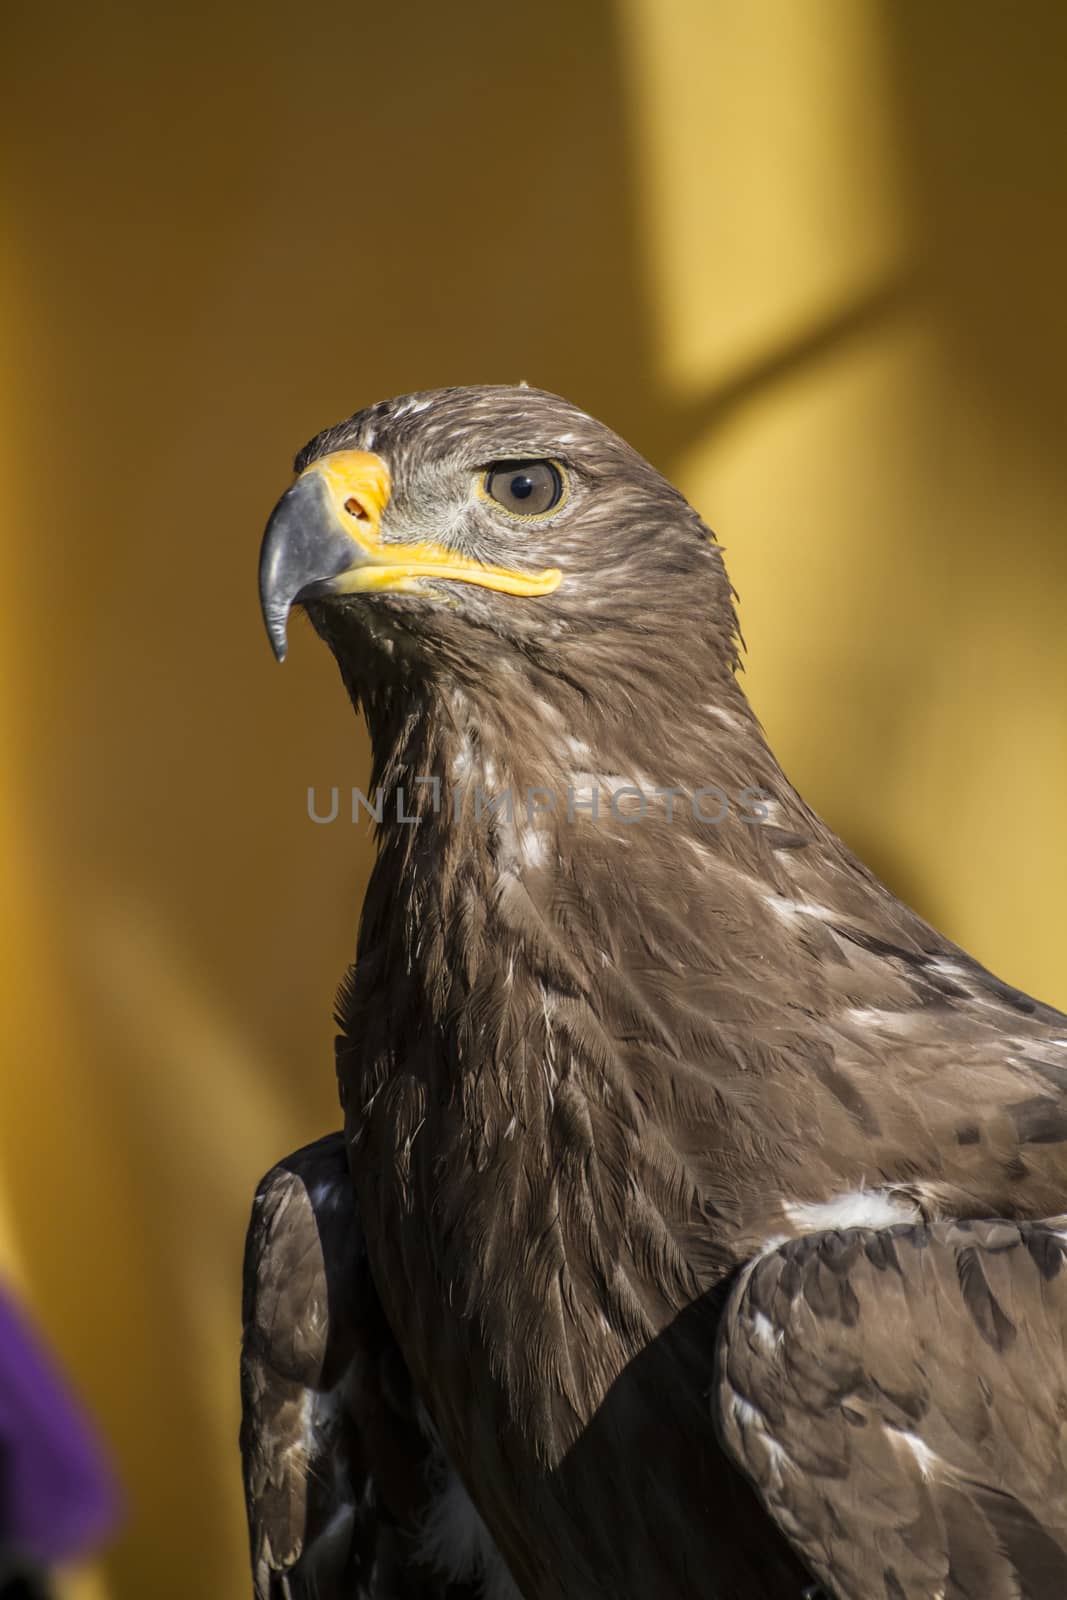 Beauty golden eagle, detail of head with large eyes, pointed bea by FernandoCortes